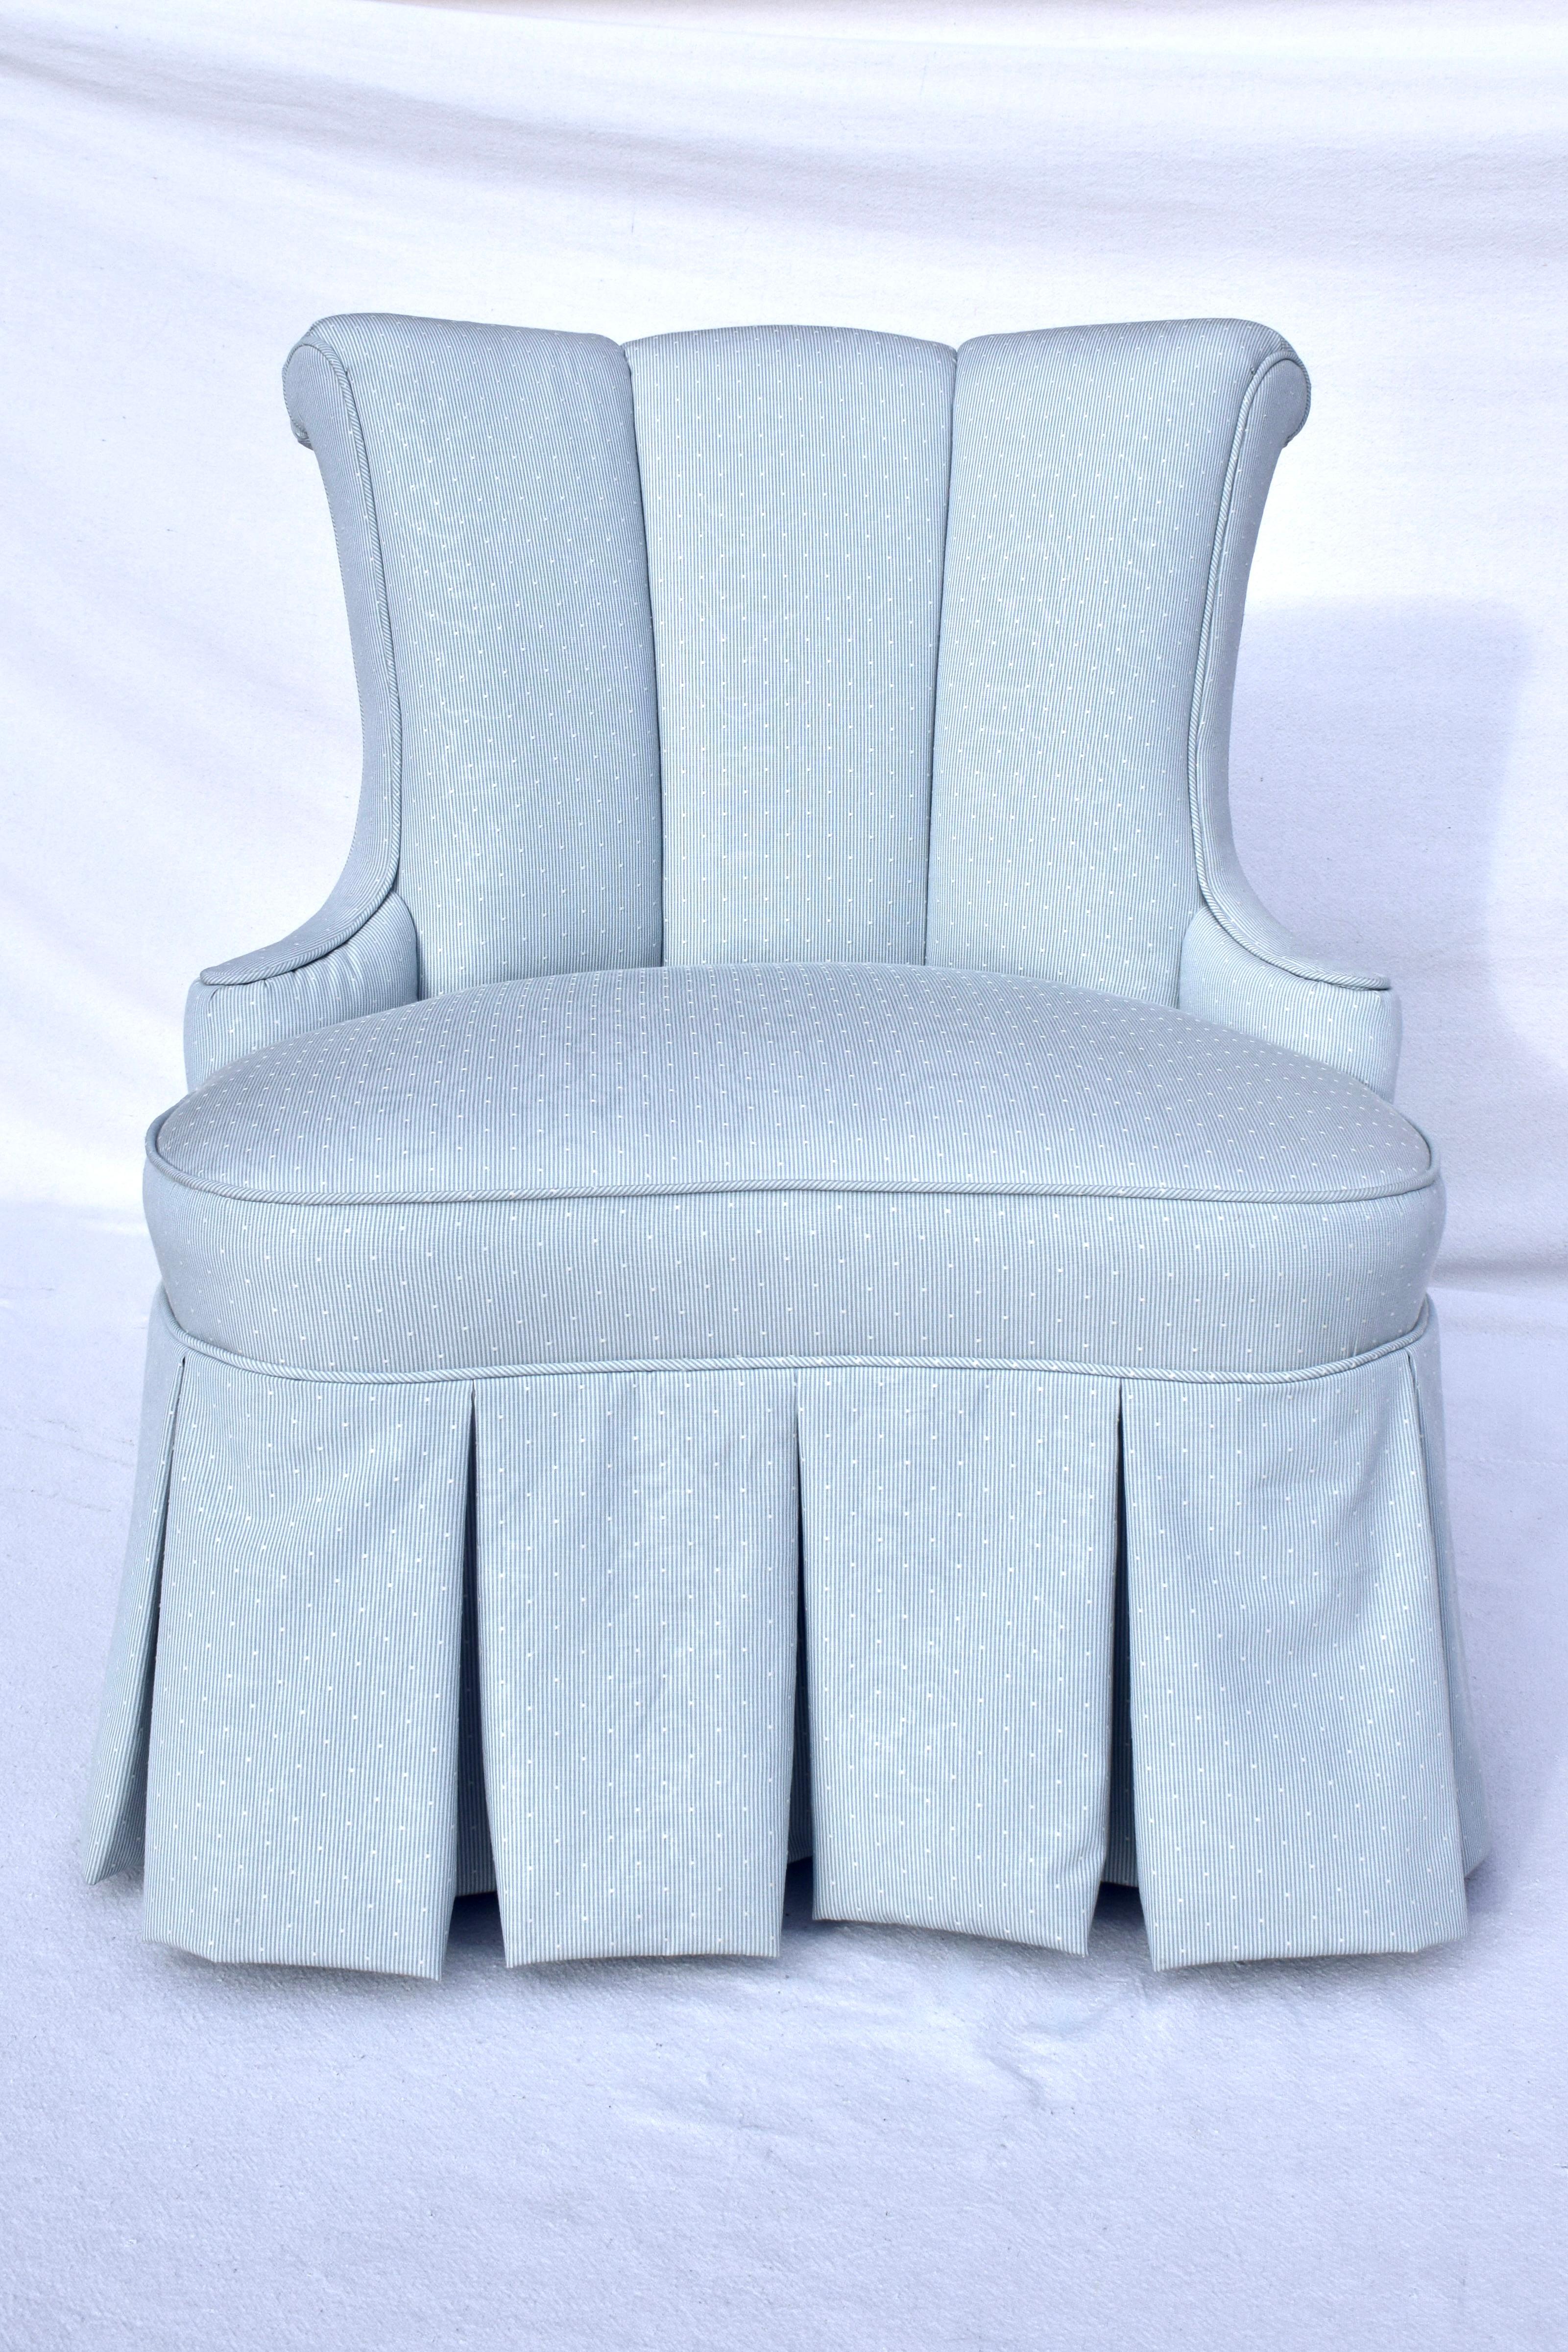 Mid 20th century Dorothy Draper Hollywood Regency channel back slipper chair with scroll details to the back & sides. Newly reupholstered in powder blue fabric with solidly maintained original spring construction, we love the box kick pleat skirt